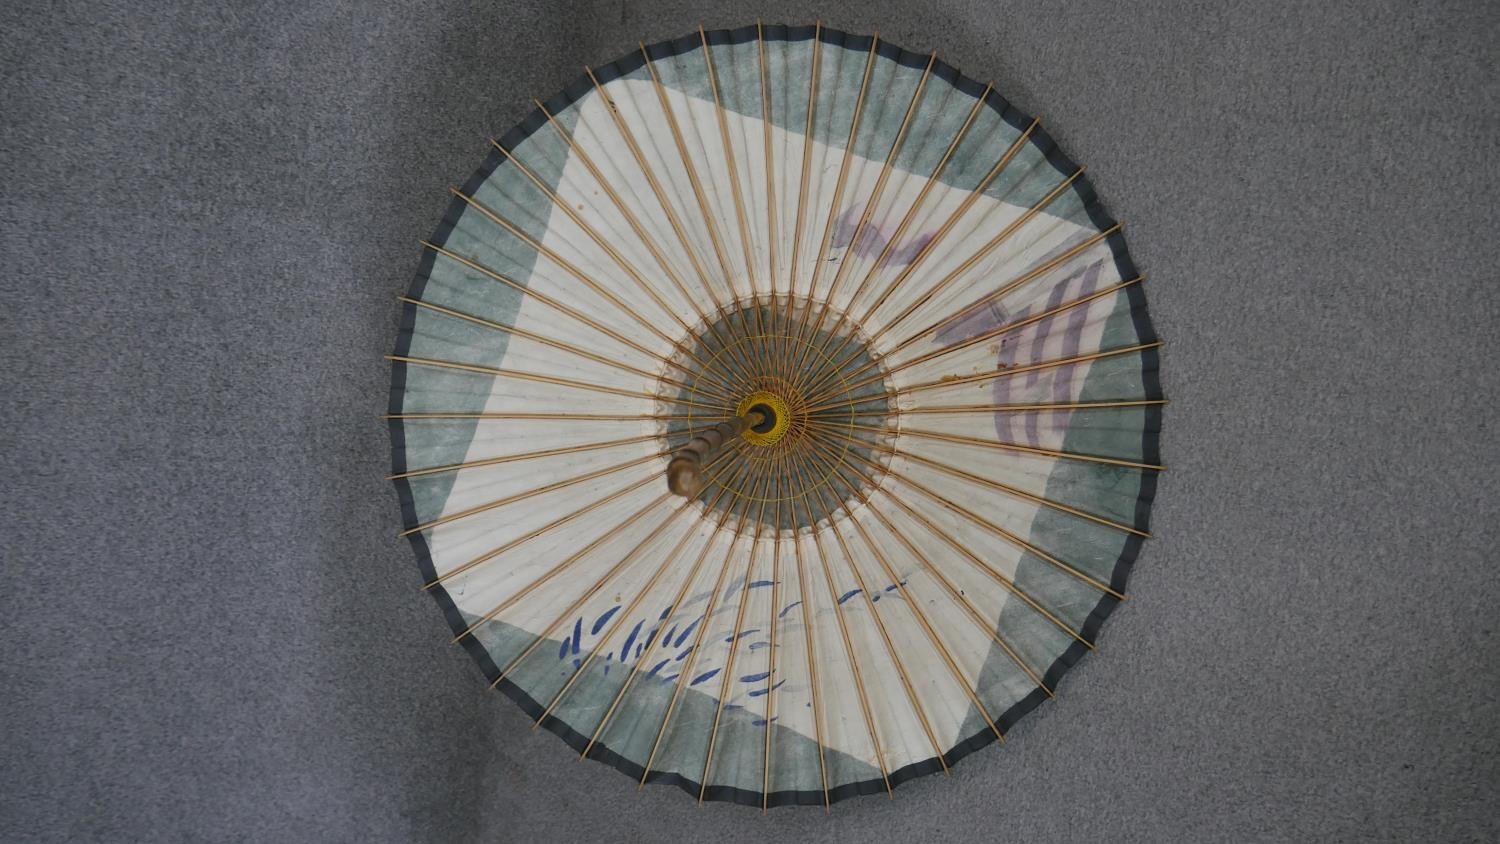 Two antique Chinese parasols, one with a painted wisteria flower design. L.95cm - Image 2 of 5